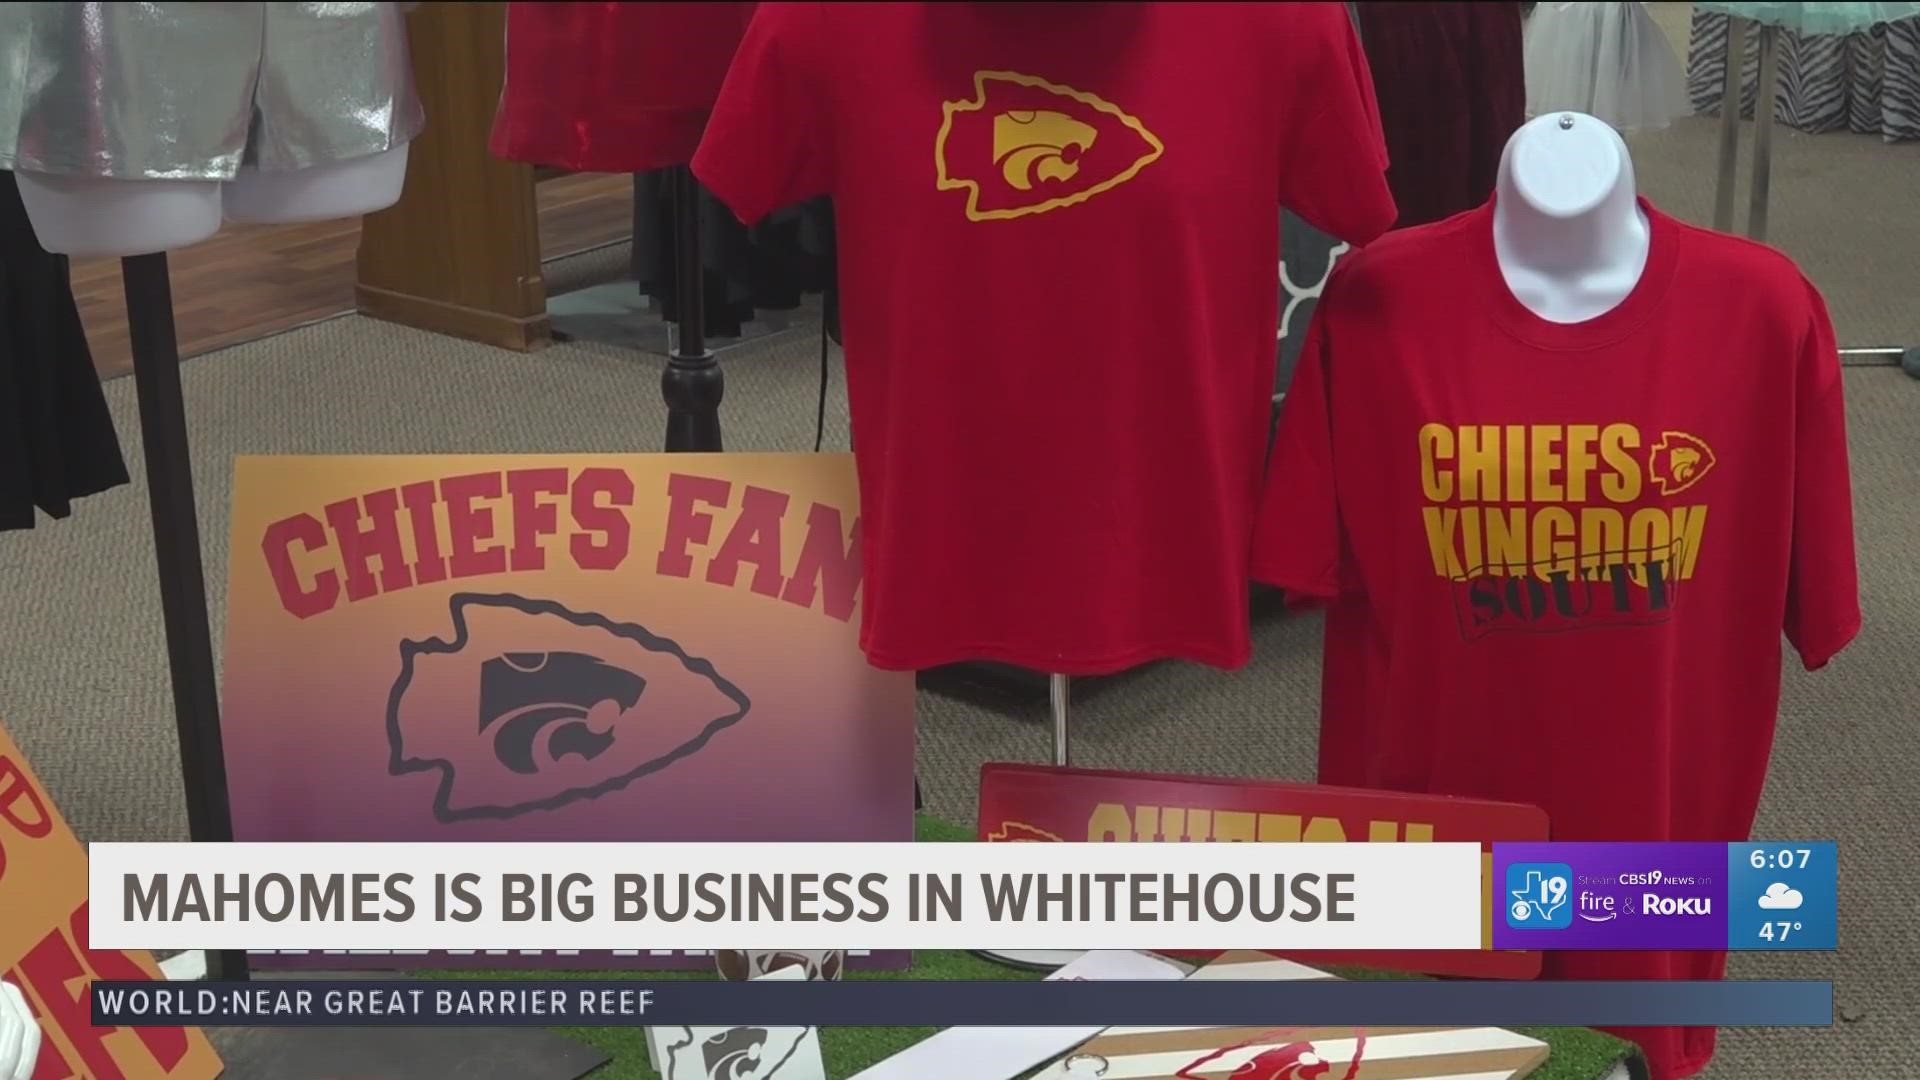 Another day closer to Super Bowl Sunday and for businesses in Whitehouse, this means more sales.